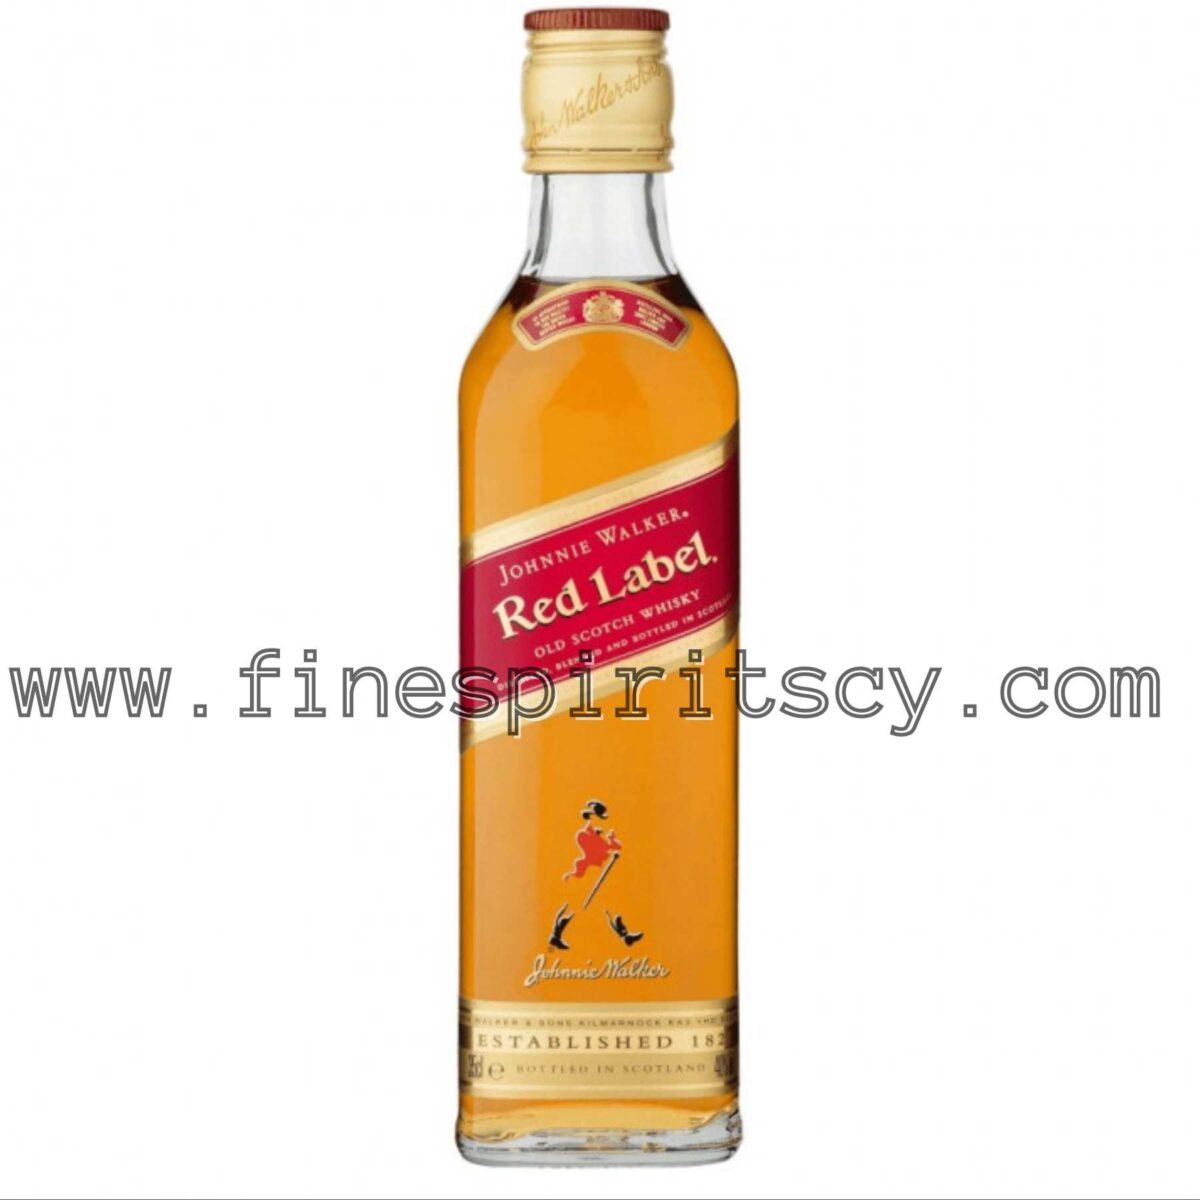 Johnnie Walker Red Label 350ml 35cl 0.35L Cyprus Price Whisky Whiskey